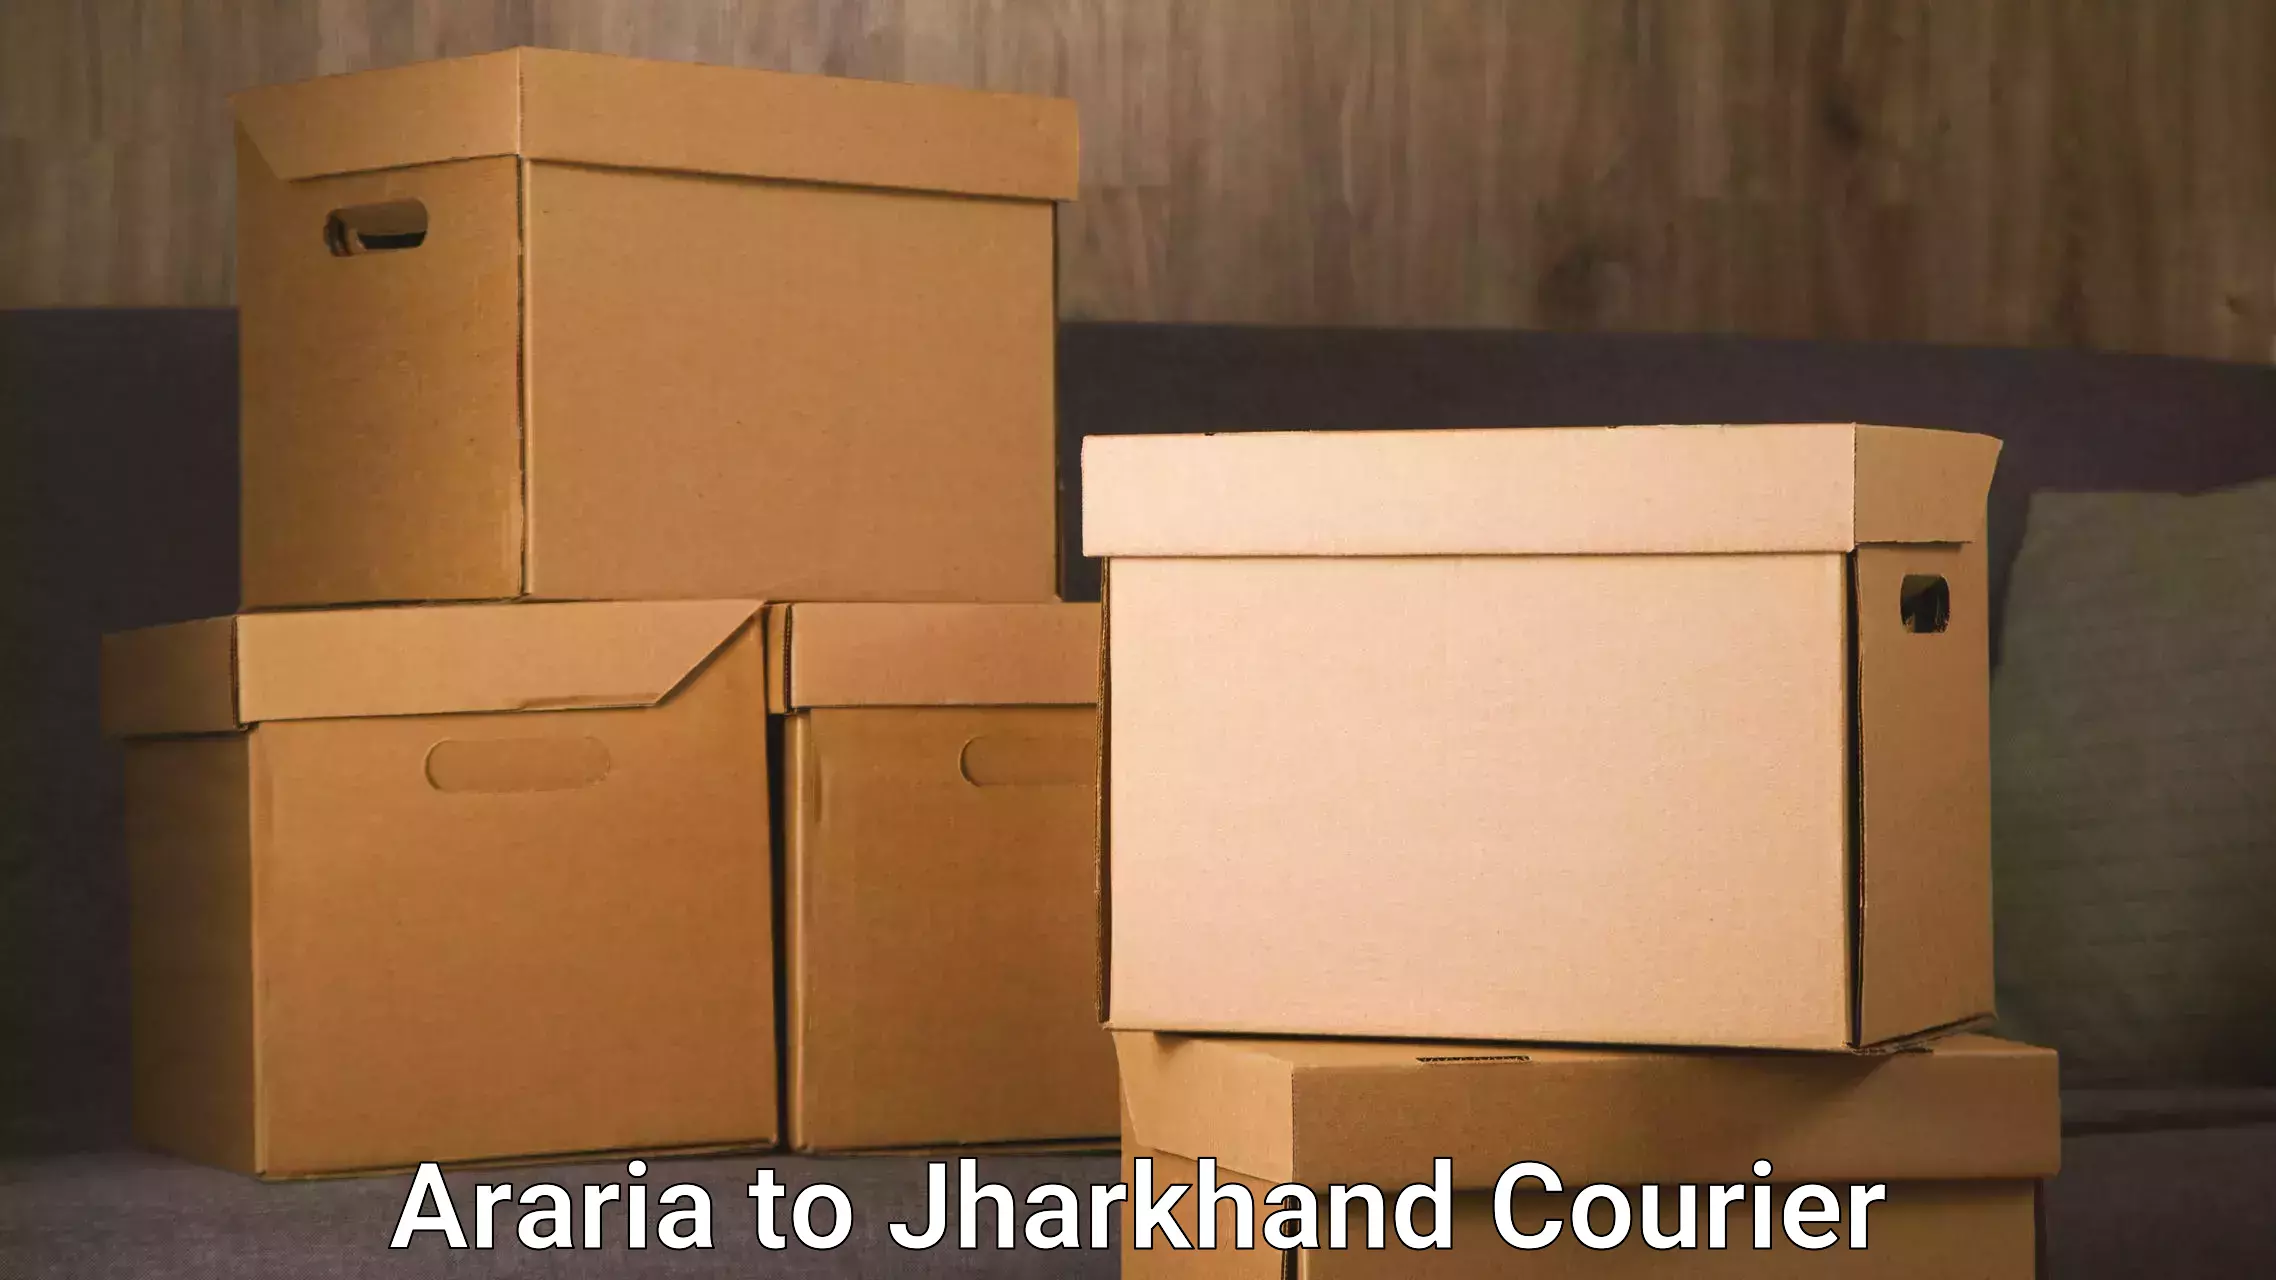 Household goods transport service Araria to Jharkhand